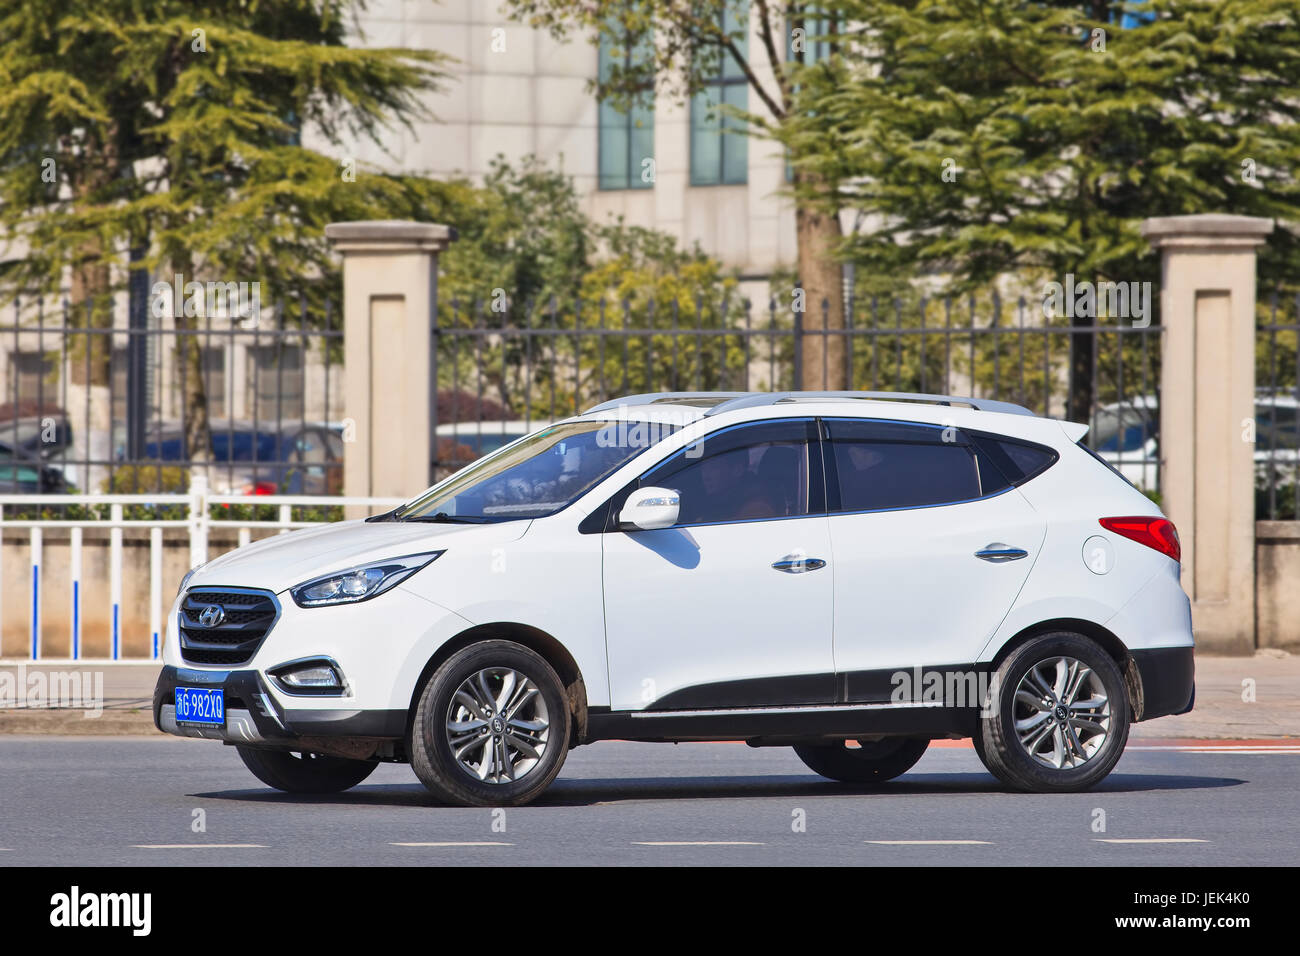 White Hyundai IX 35 SUV on the street. Hyundai car sales in China increased 11.2 percent in 2015, keeping an upward trend for the South Korean brand. Stock Photo